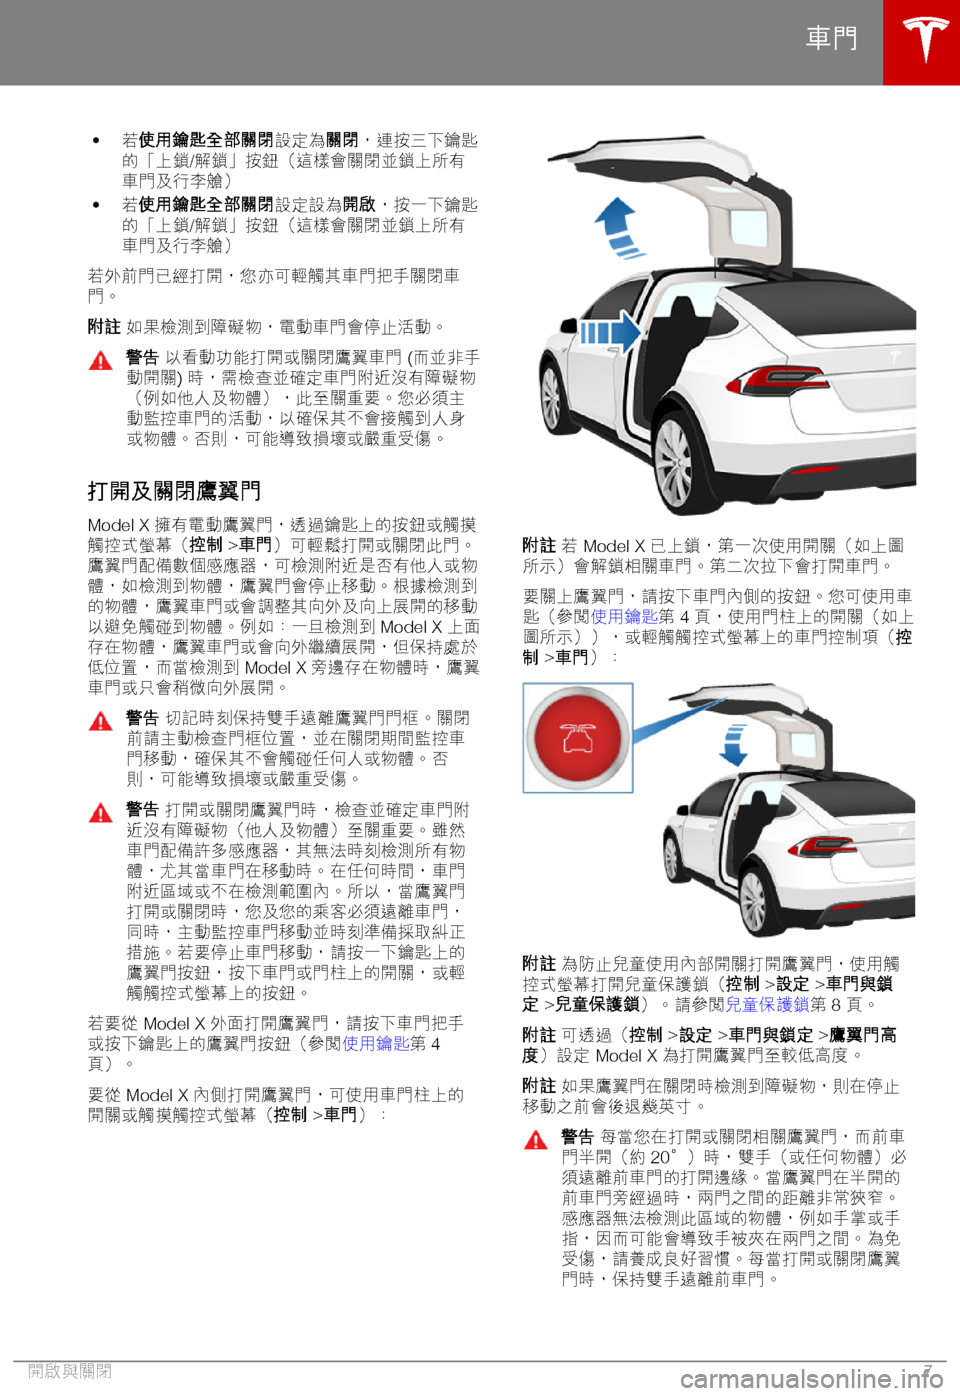 TESLA MODEL X 2018  車主手冊 (in Chinese Traditional) �h 